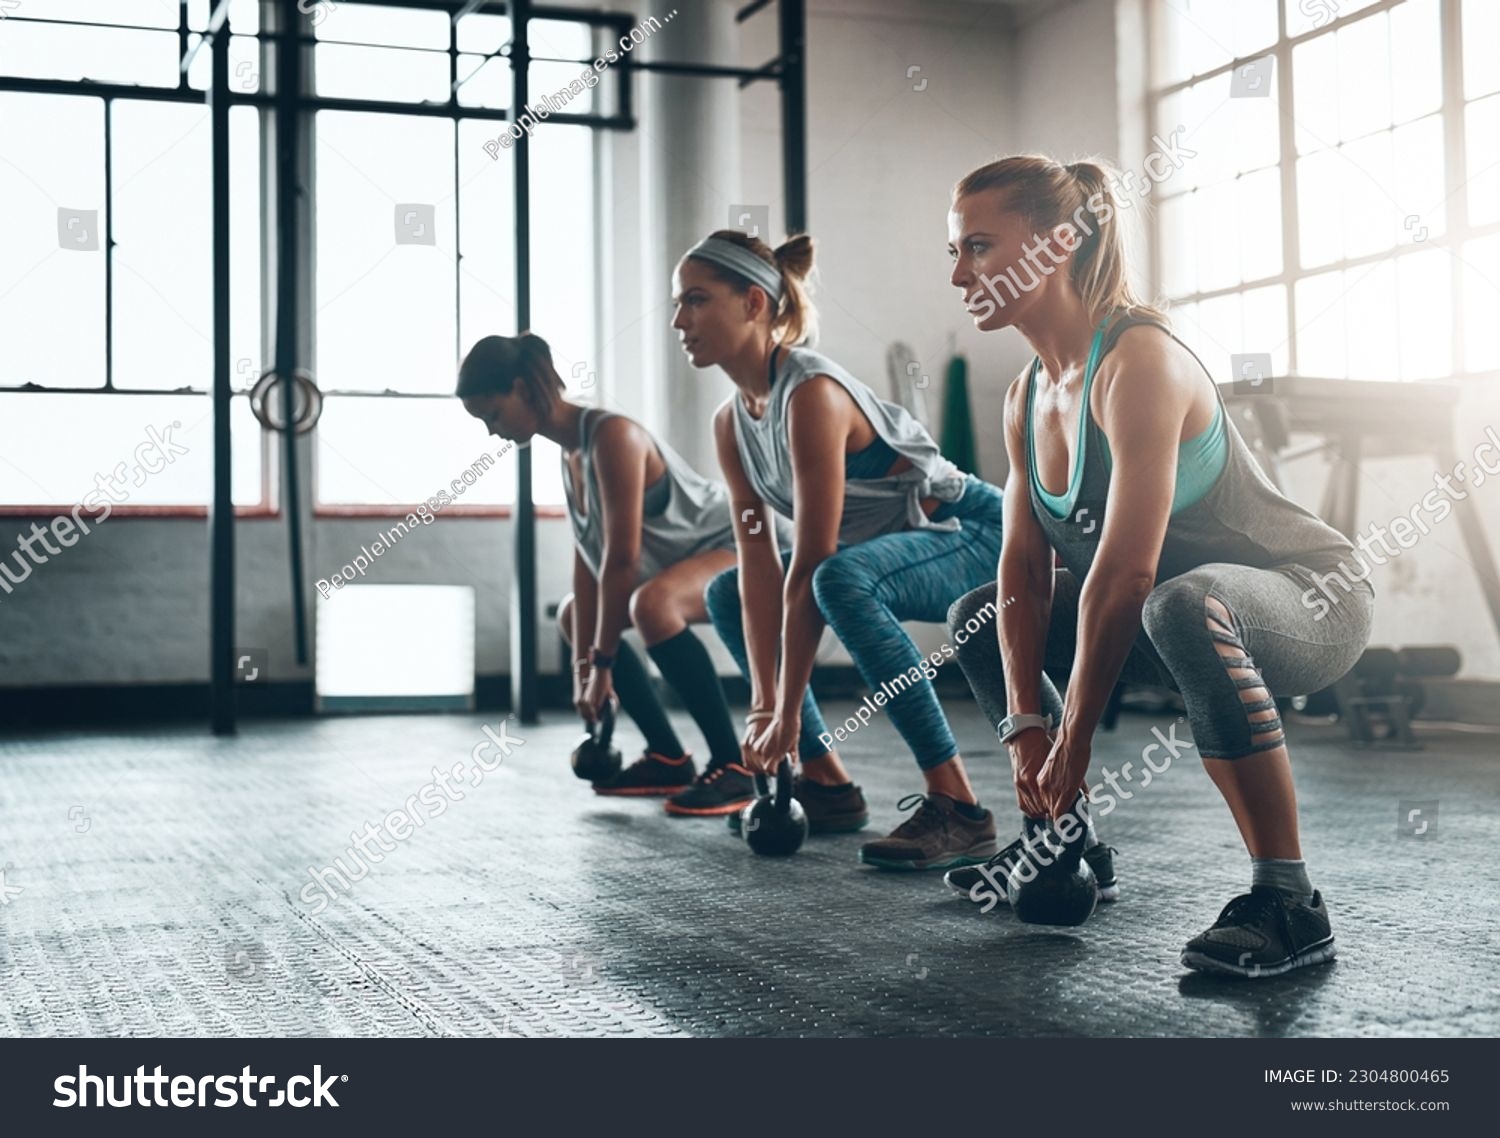 Kettlebell, fitness and women in a gym, training or workout goal with wellness, class or exercise. Female athlete, girls or squat with equipment, sports or relax with healthy lifestyle or challenge #2304800465